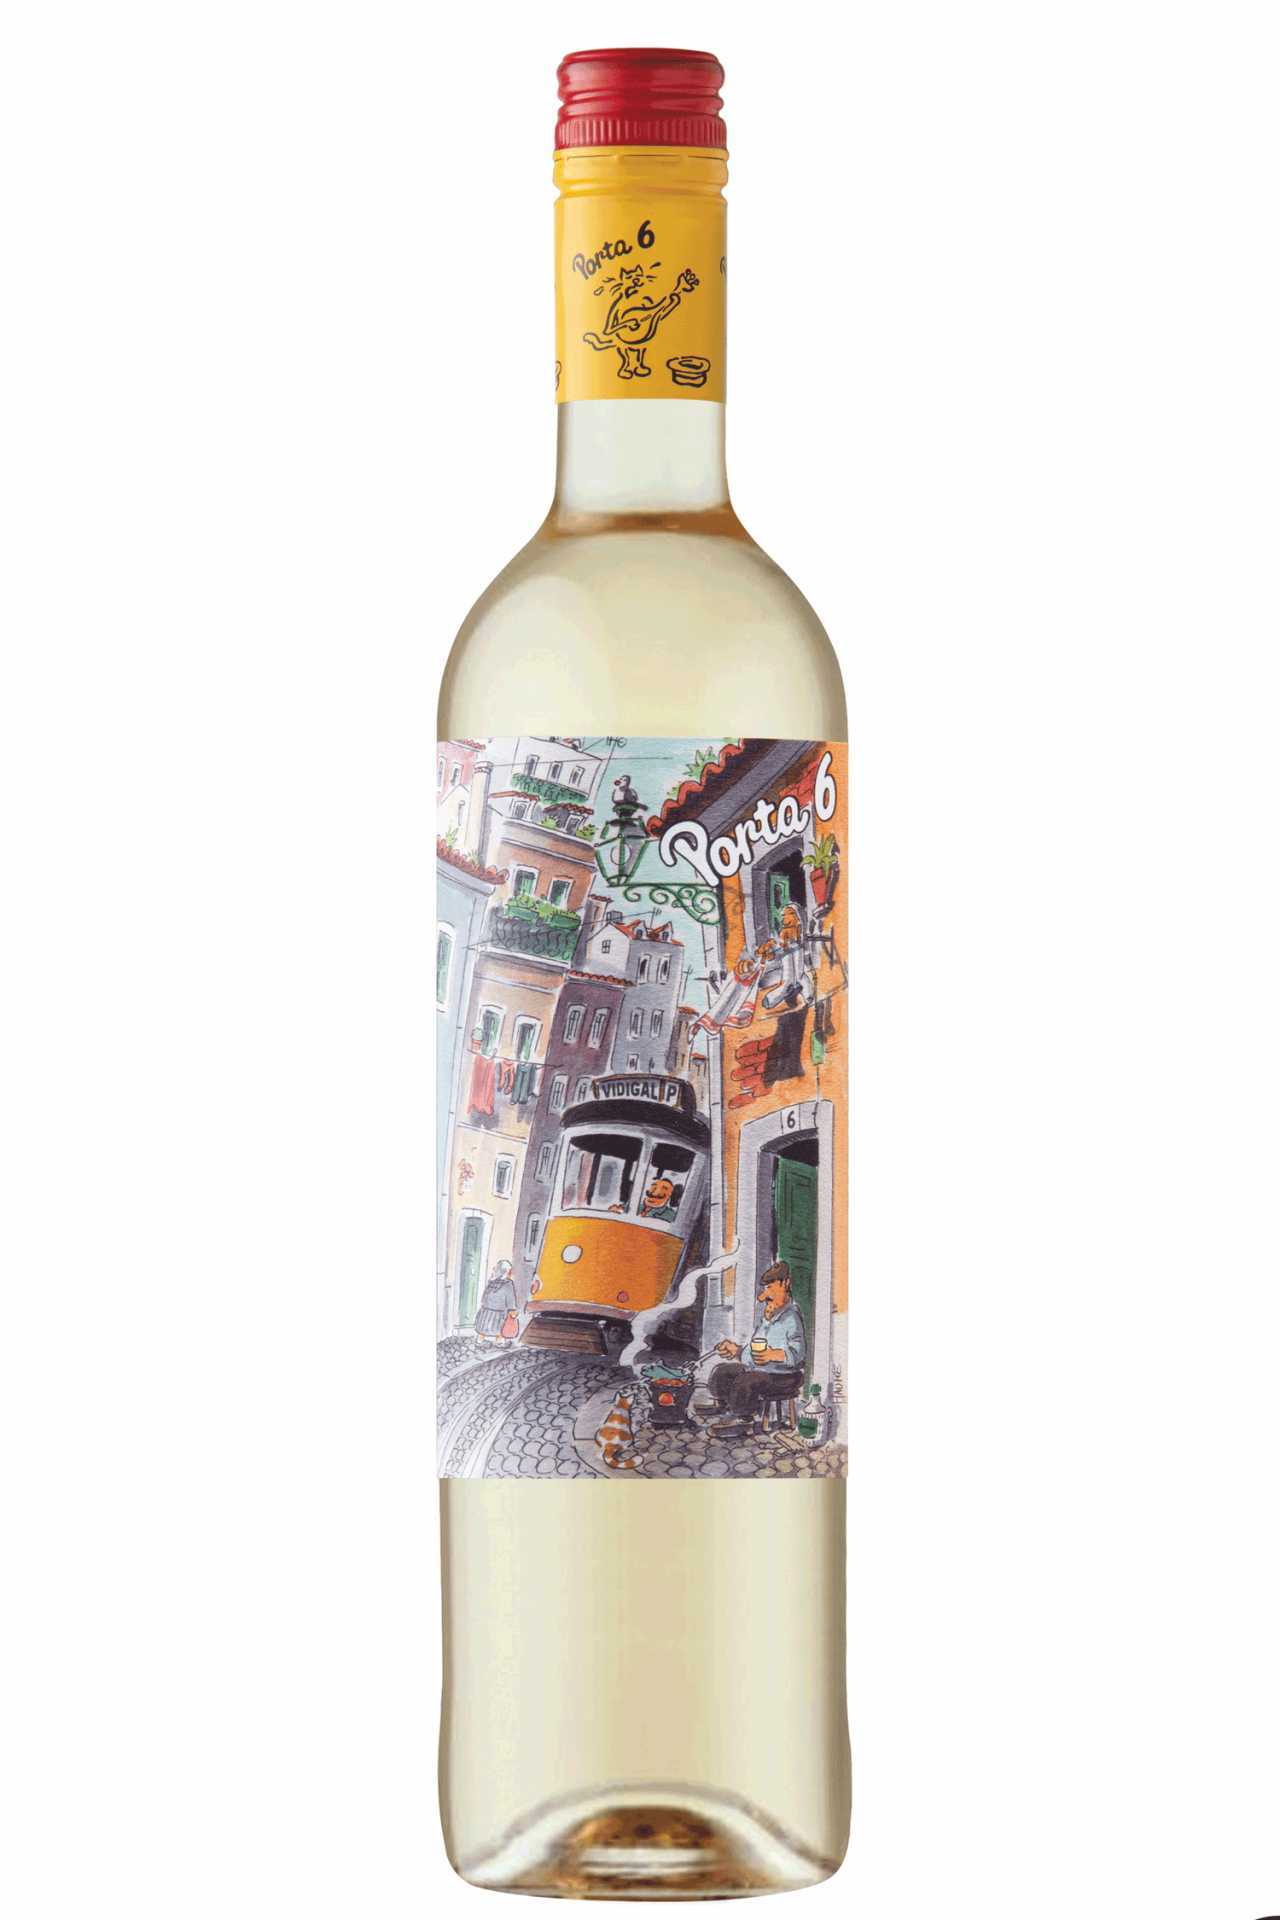 Wines from Portugal | Porta 6 White IGP Lisboa